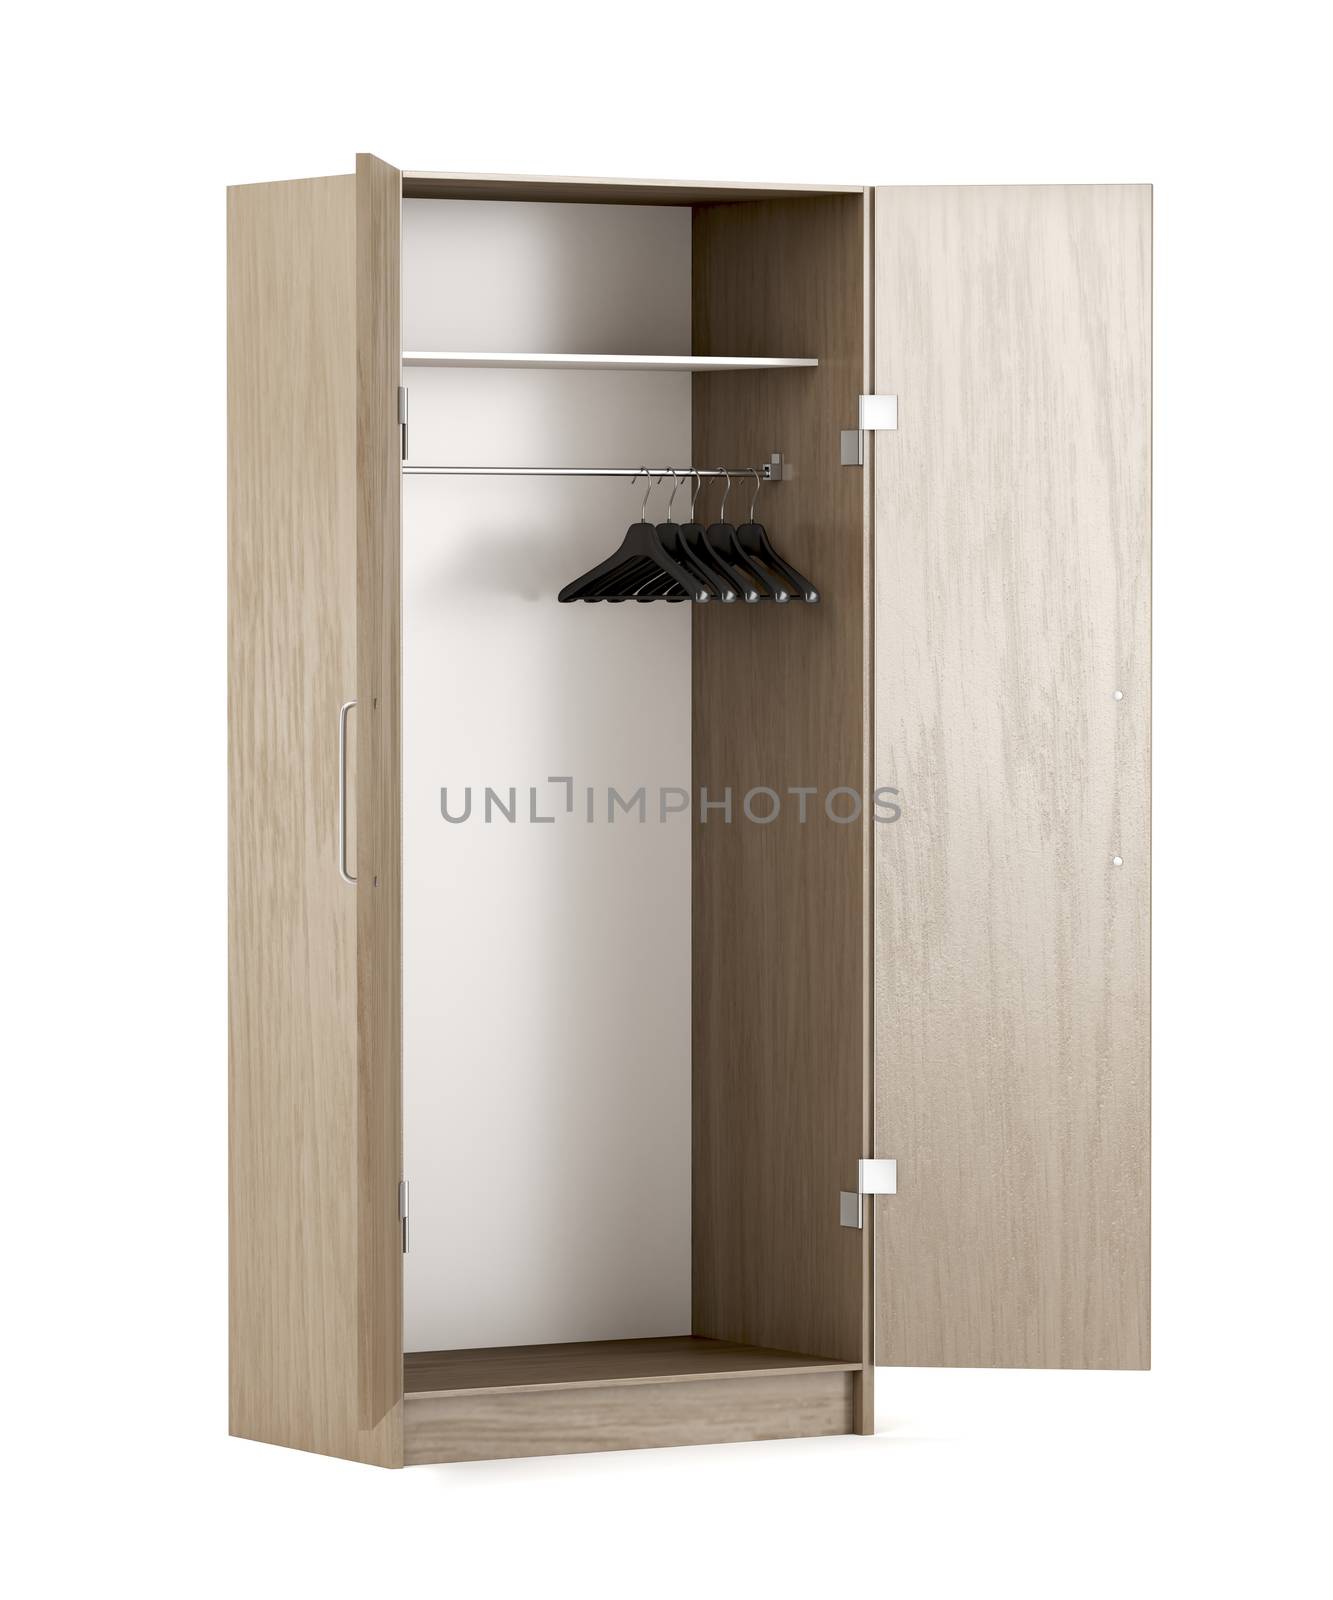 Opened wooden wardrobe, empty inside by magraphics